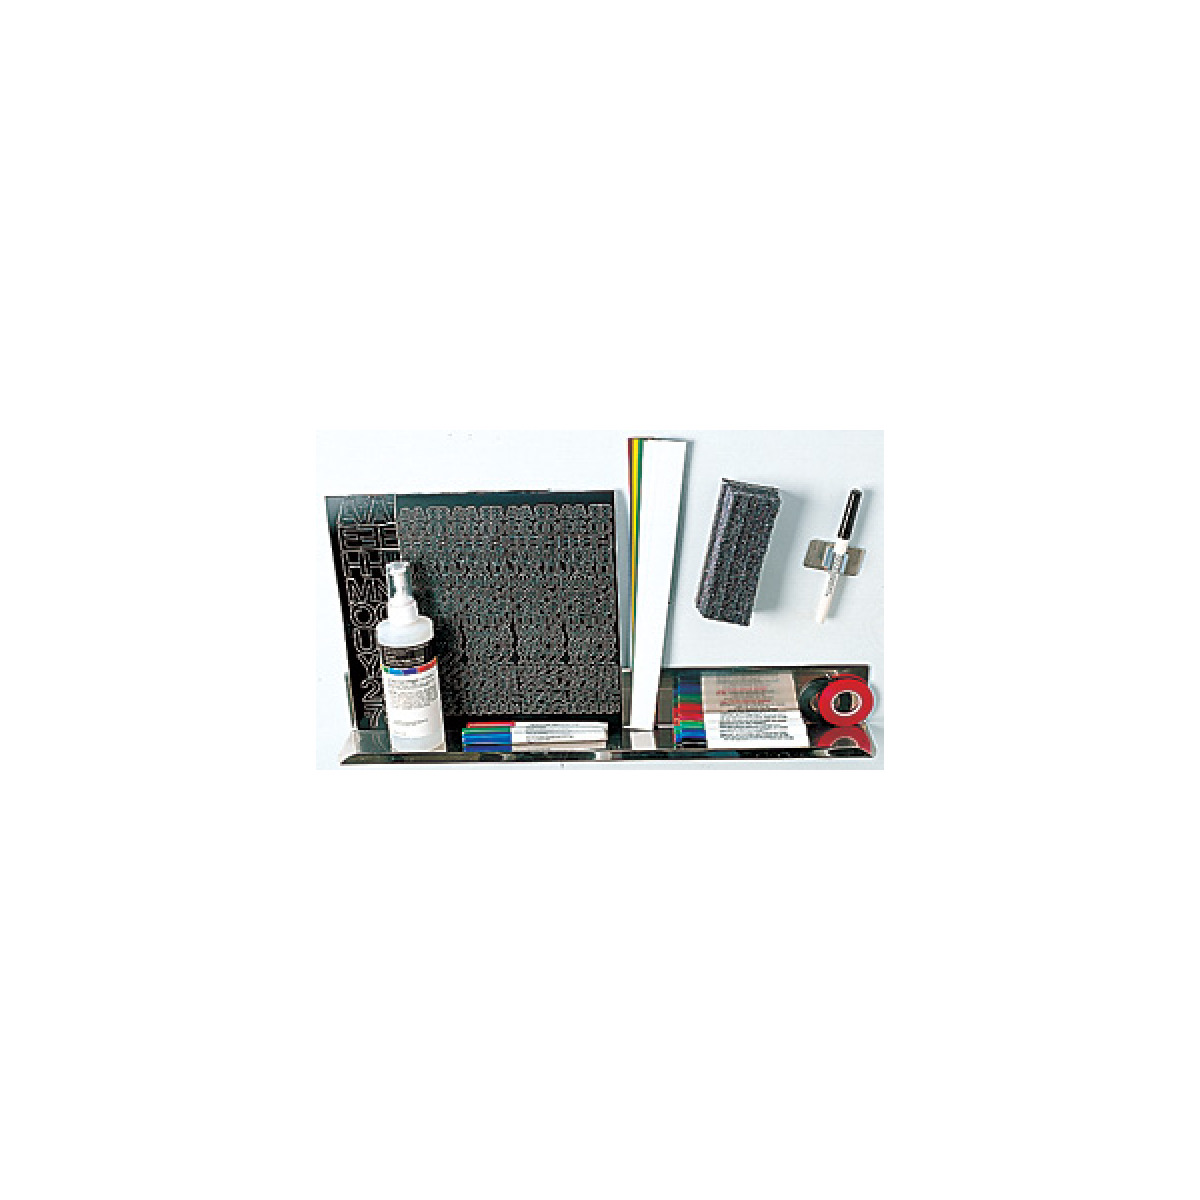 whiteboard accessory kit contents